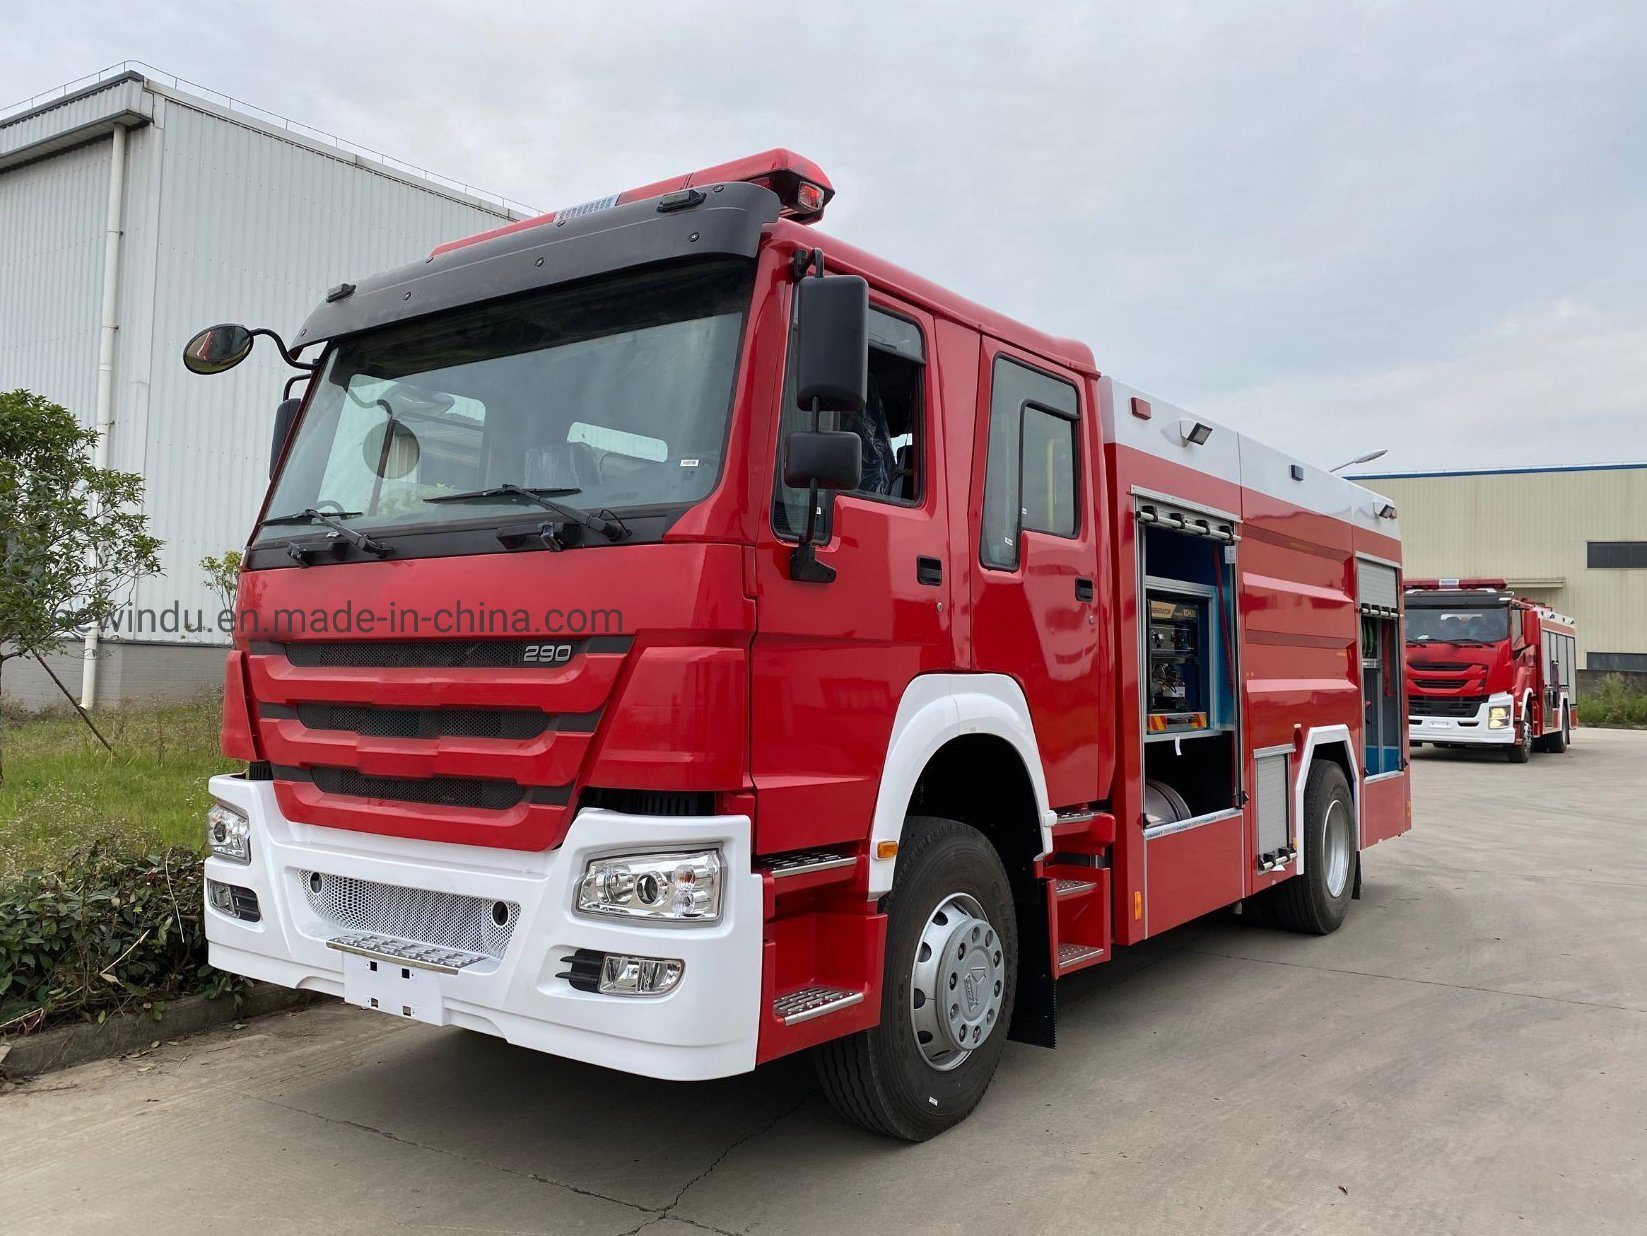 Water Tower Fire Fighting Vehicle 5313jp25 for Hot Sale